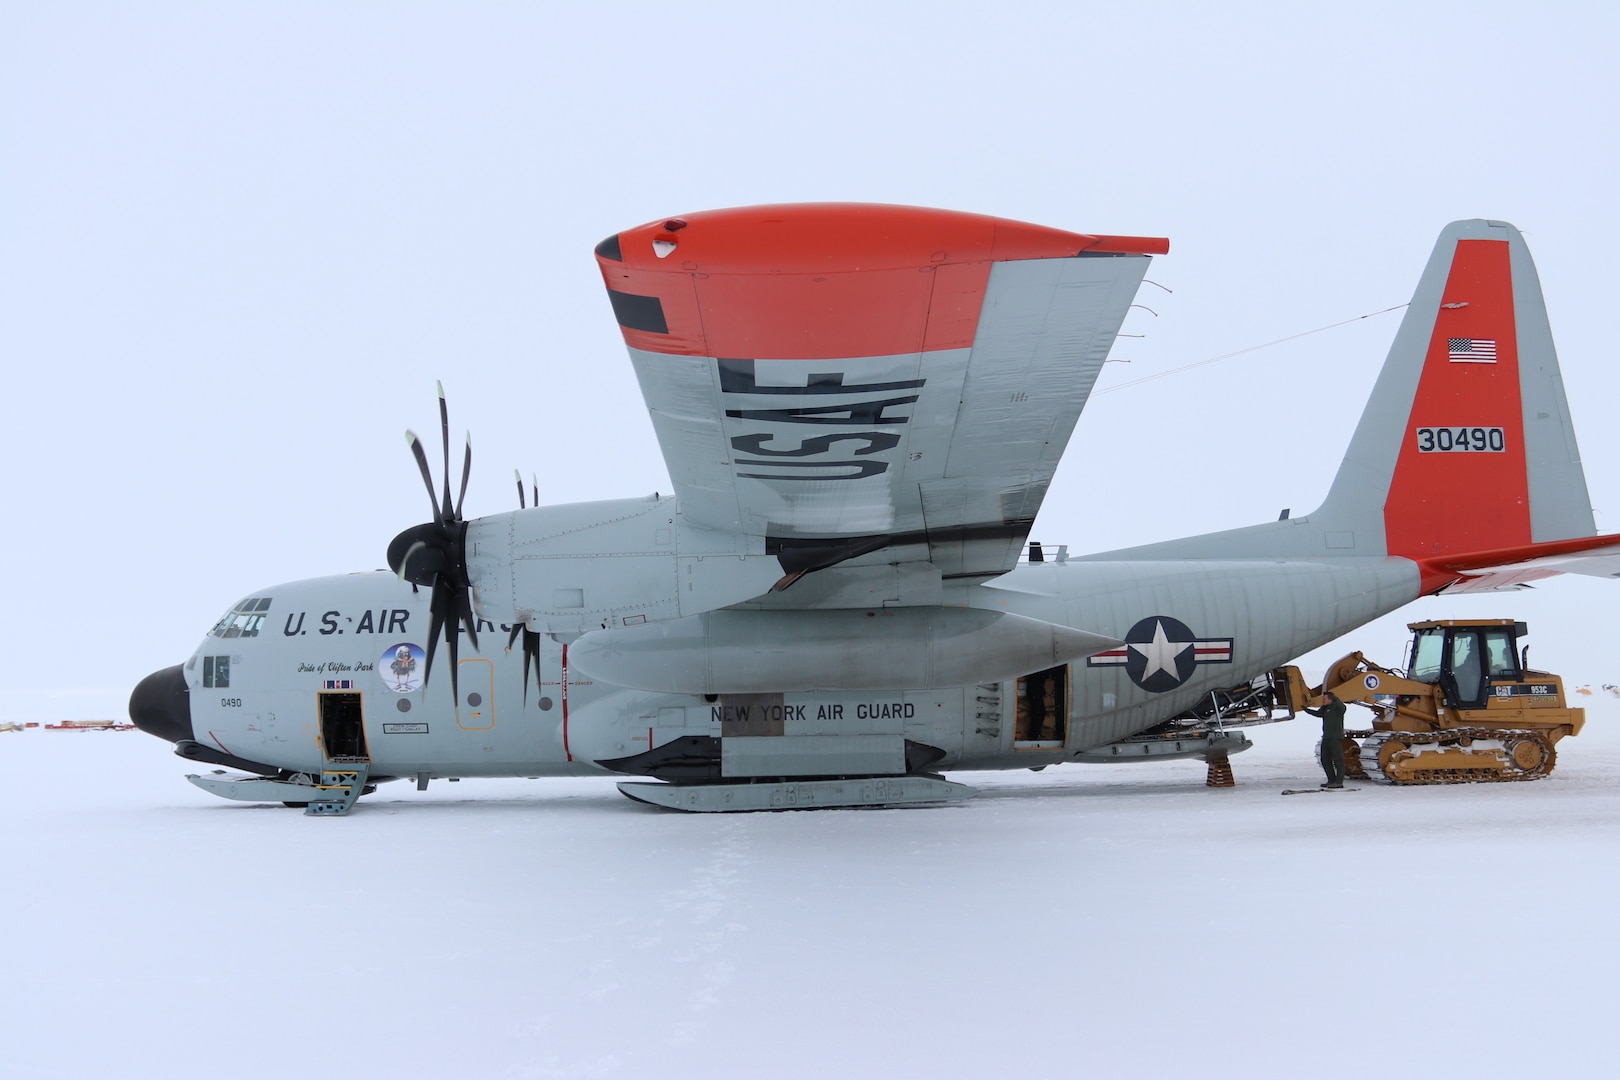 Members of the New York Air National Guard's 109th Airlift Wing load cargo onto an LC-130, ski-equipped aircraft at McMurdo Station, Antarctica on January 15, 2019.